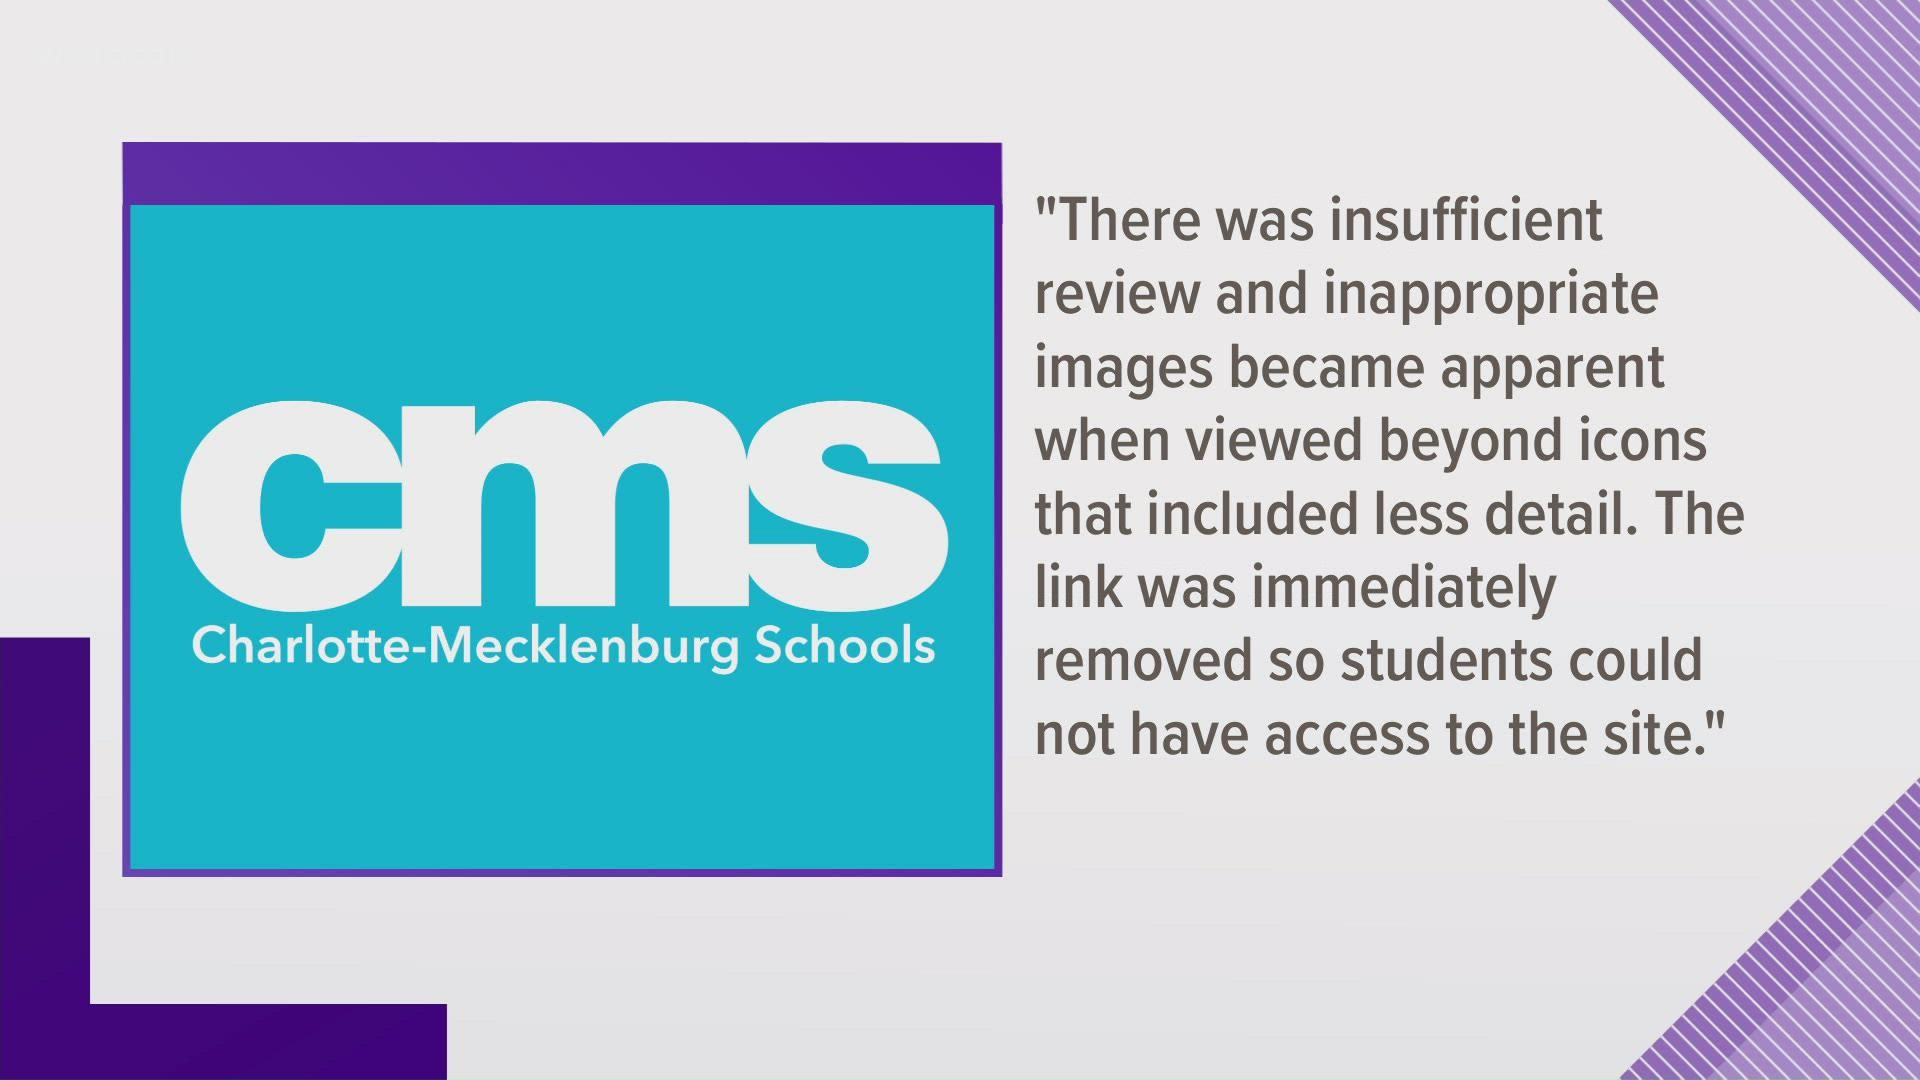 CMS said it is revisiting protocols with teachers after some sexually explicit images were included in a 6th-grade art lesson.